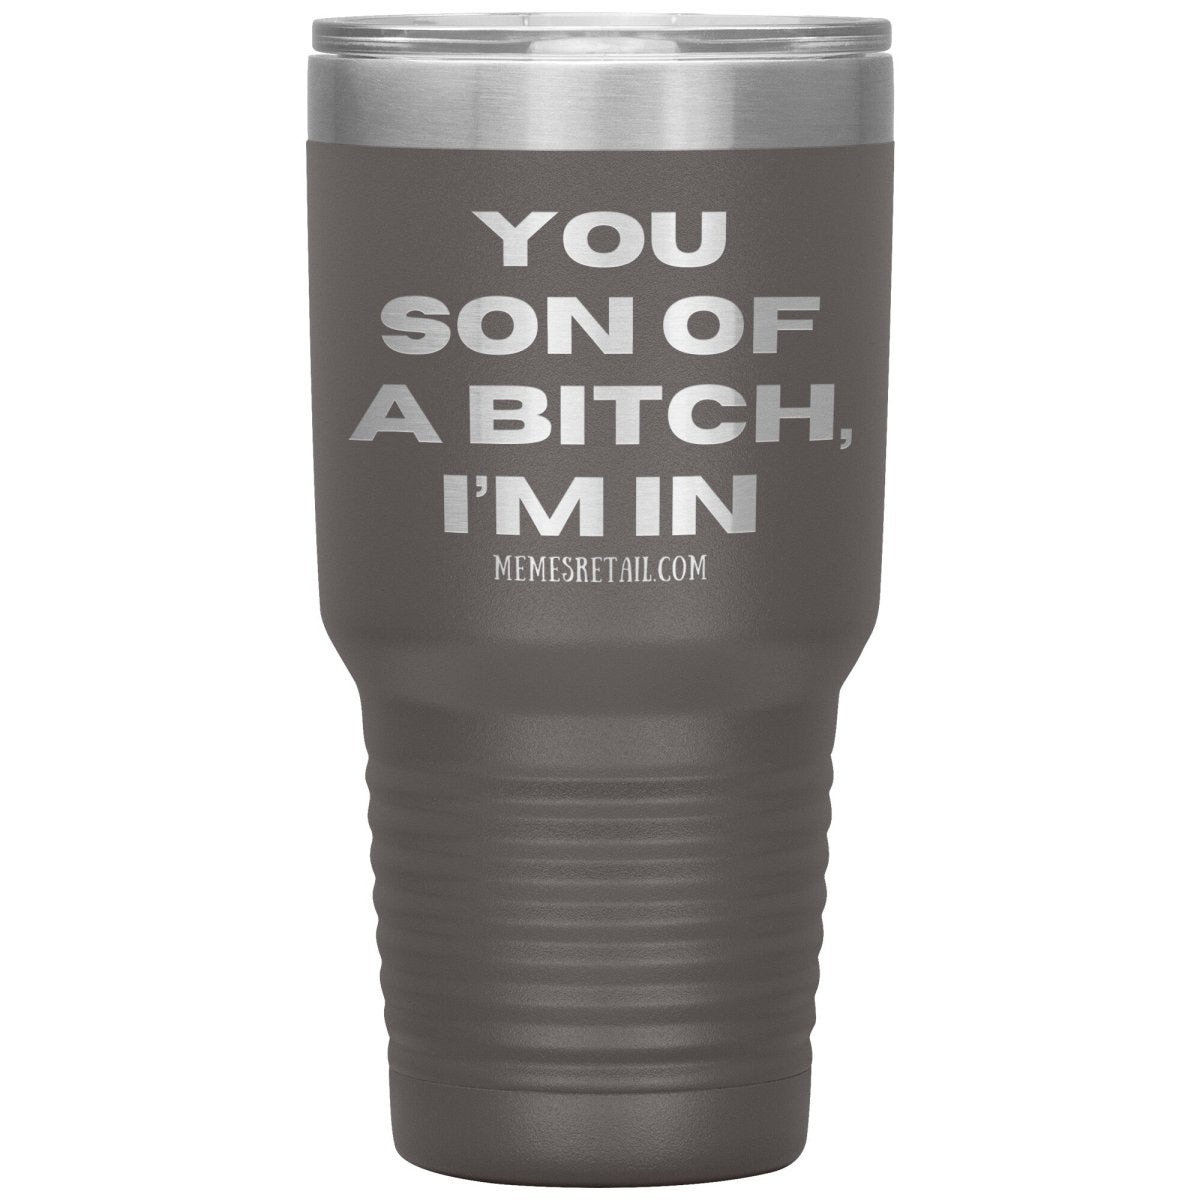 You son of a bitch, I’m in Tumblers, 30oz Insulated Tumbler / Pewter - MemesRetail.com